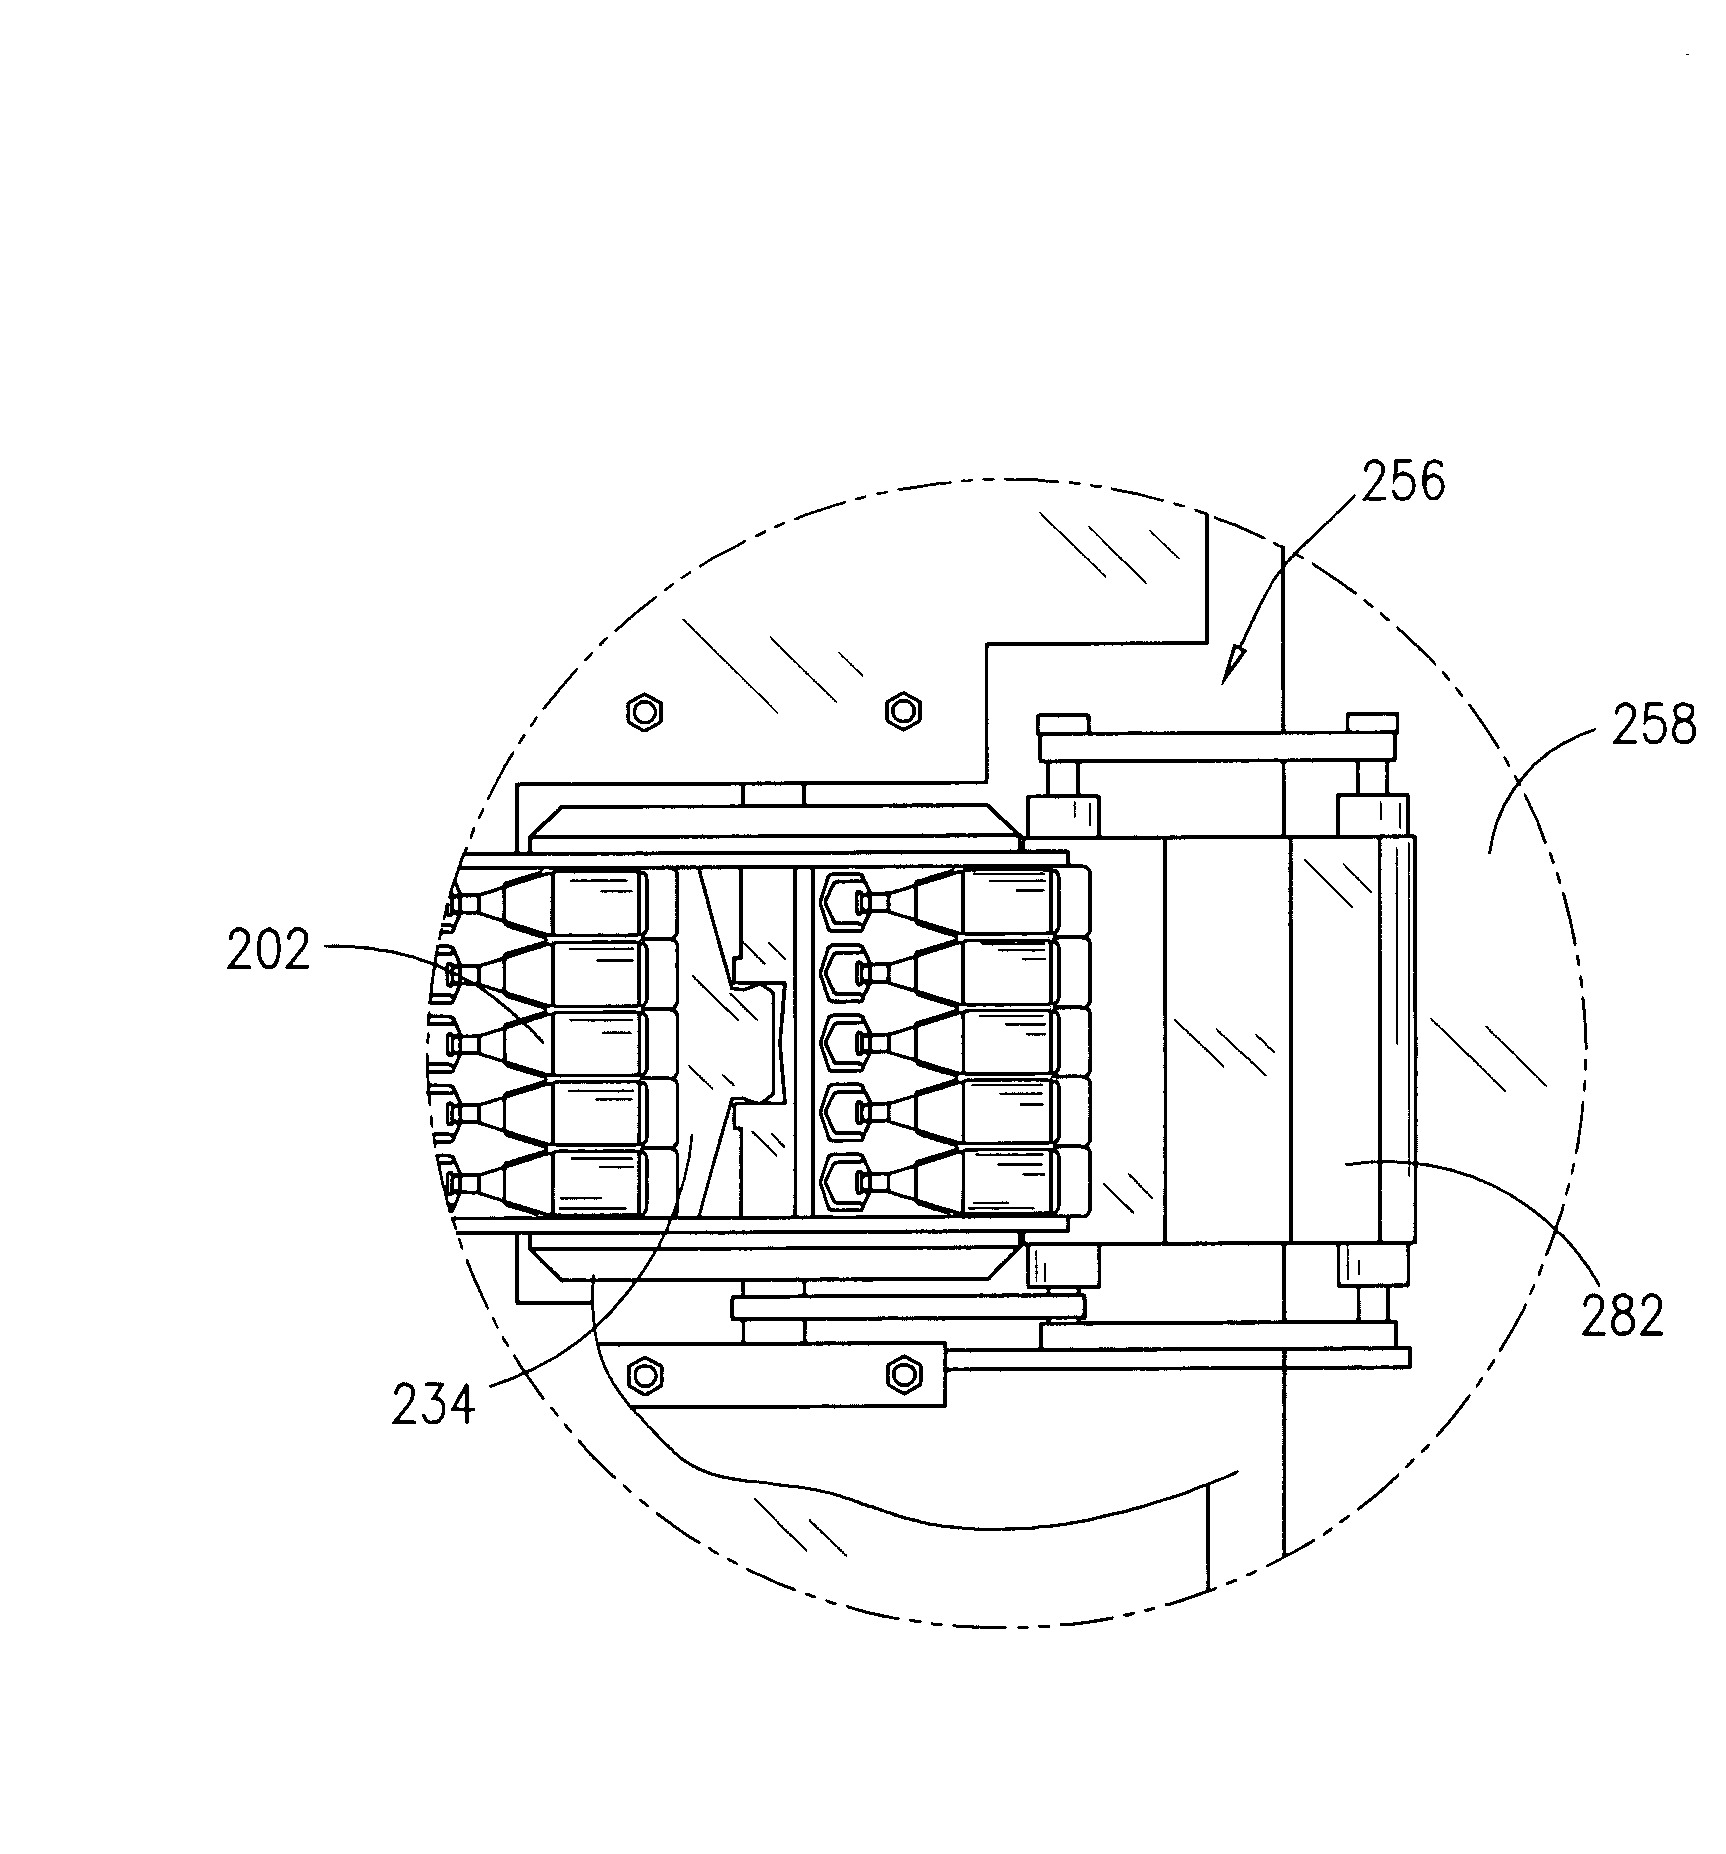 Apparatus and method for imprinting vials